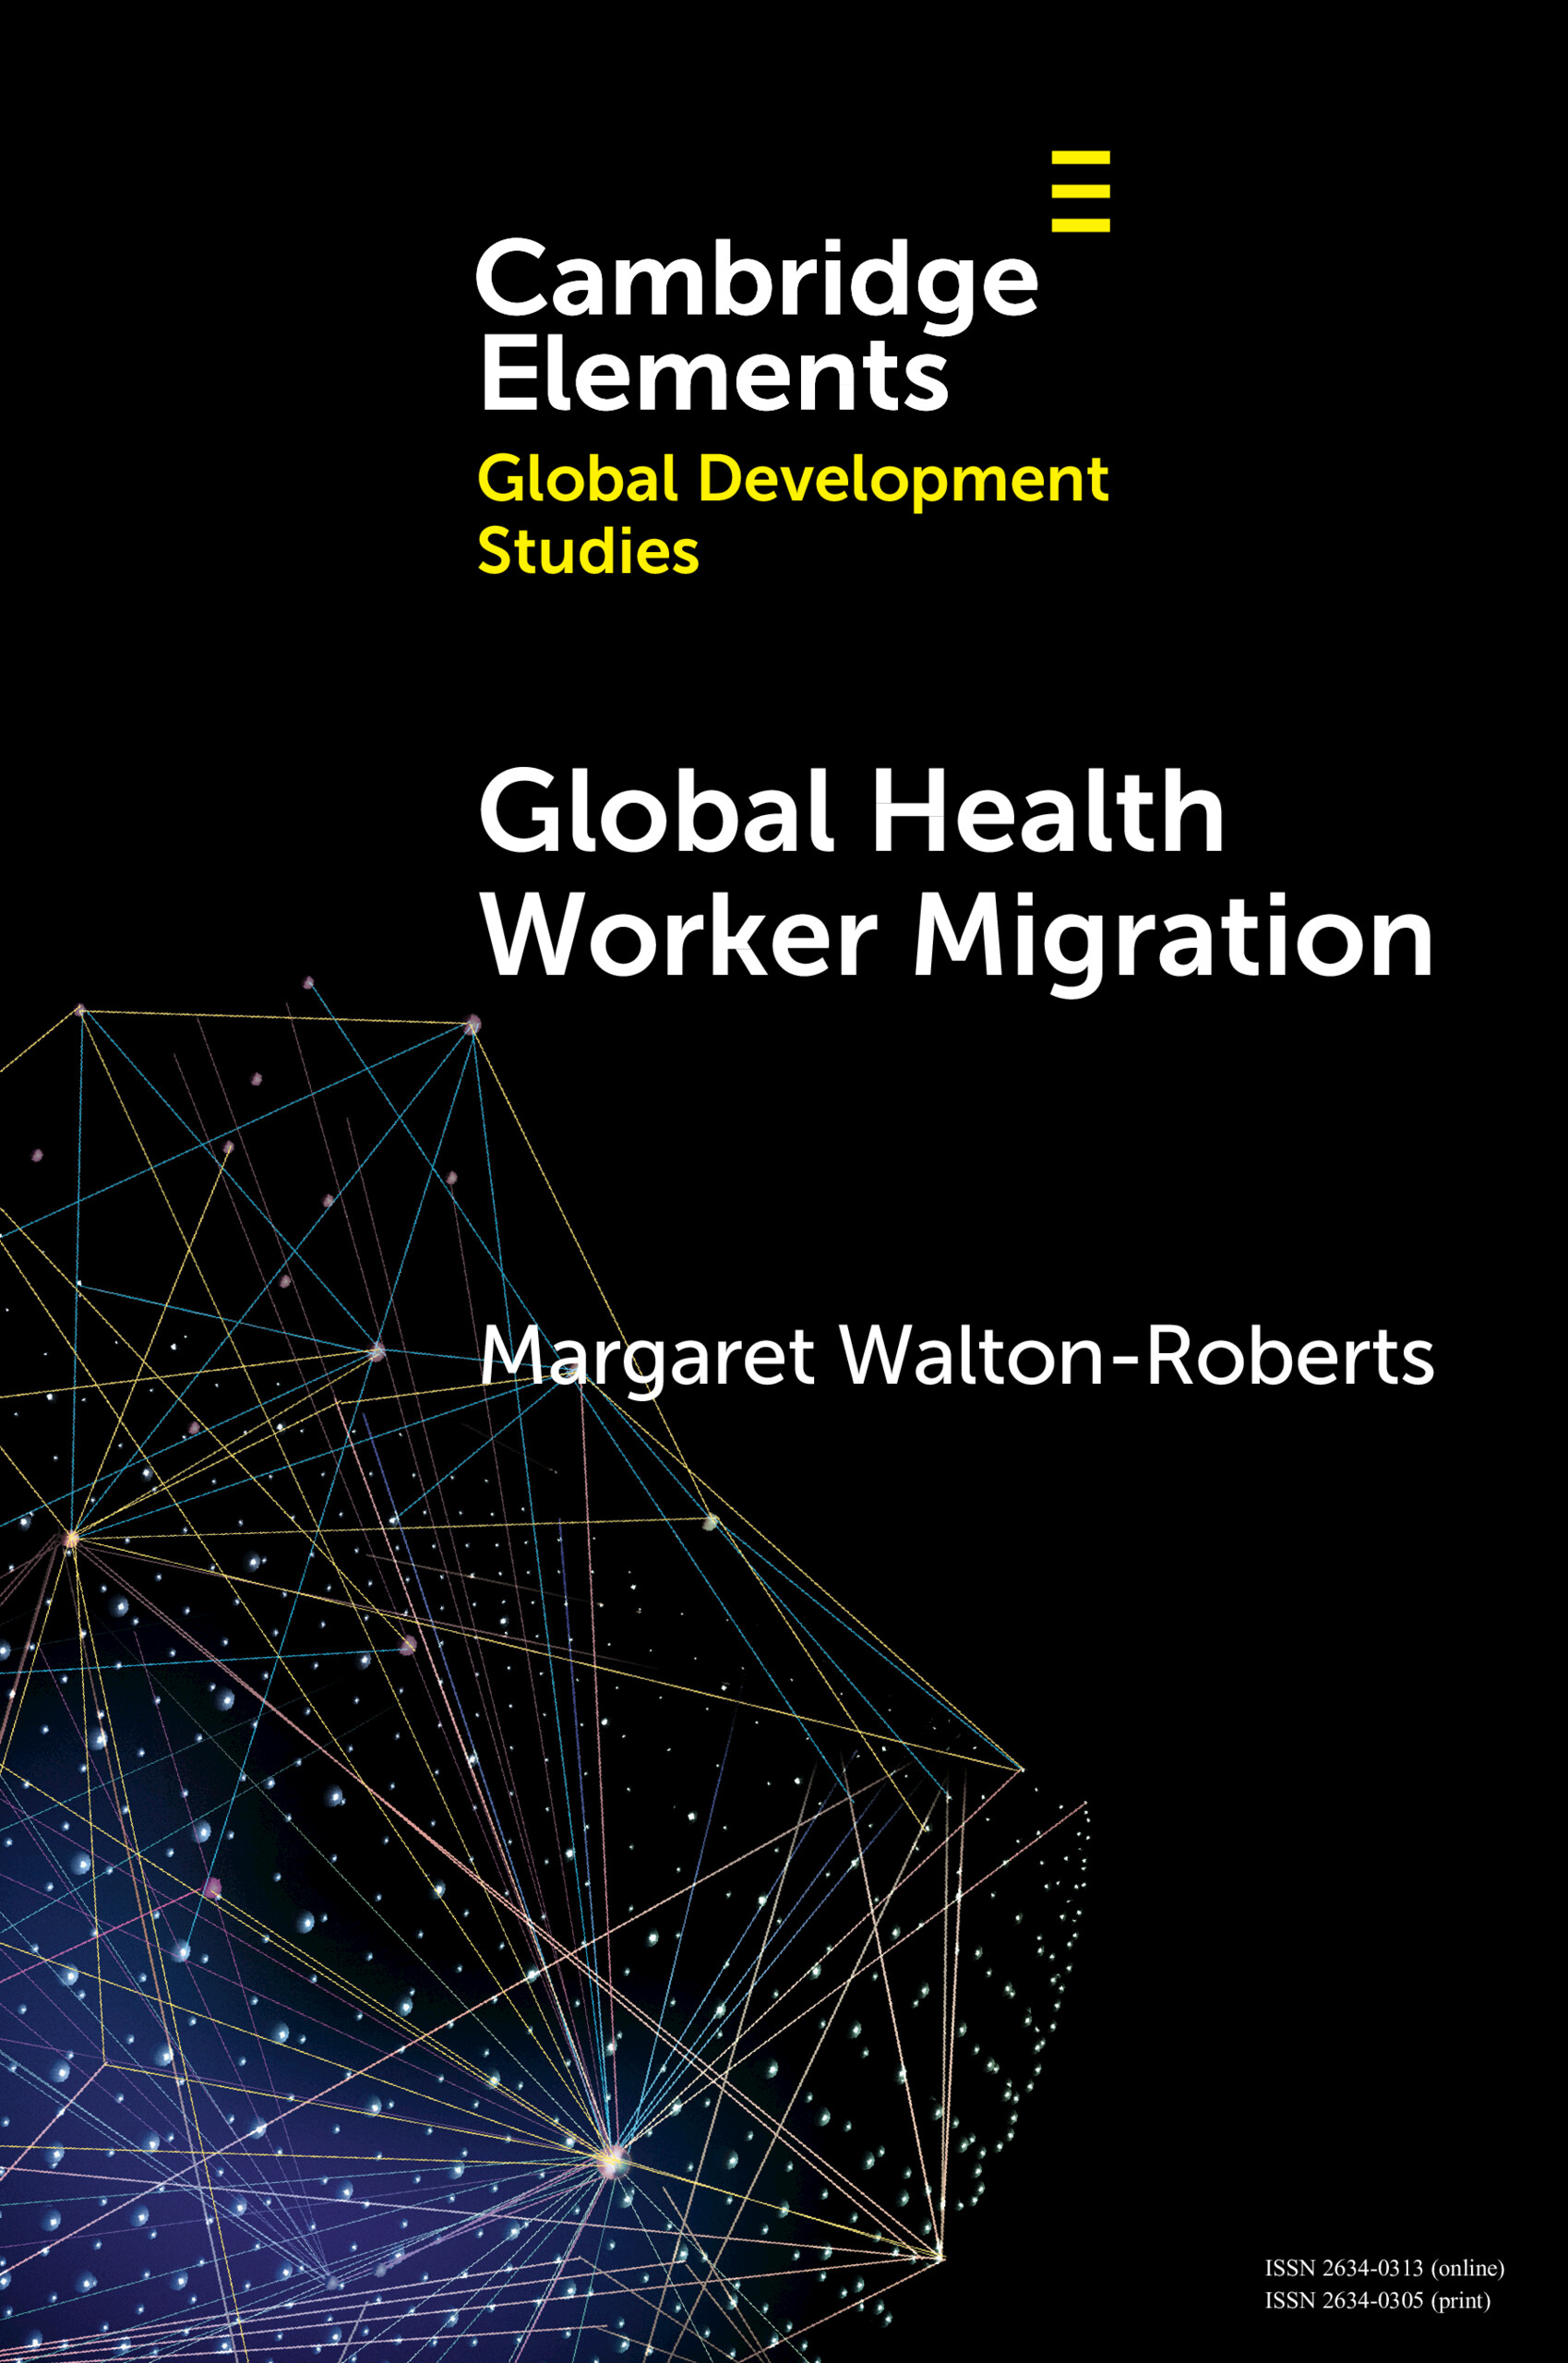 Global Health Worker Migration Book Cover MWR